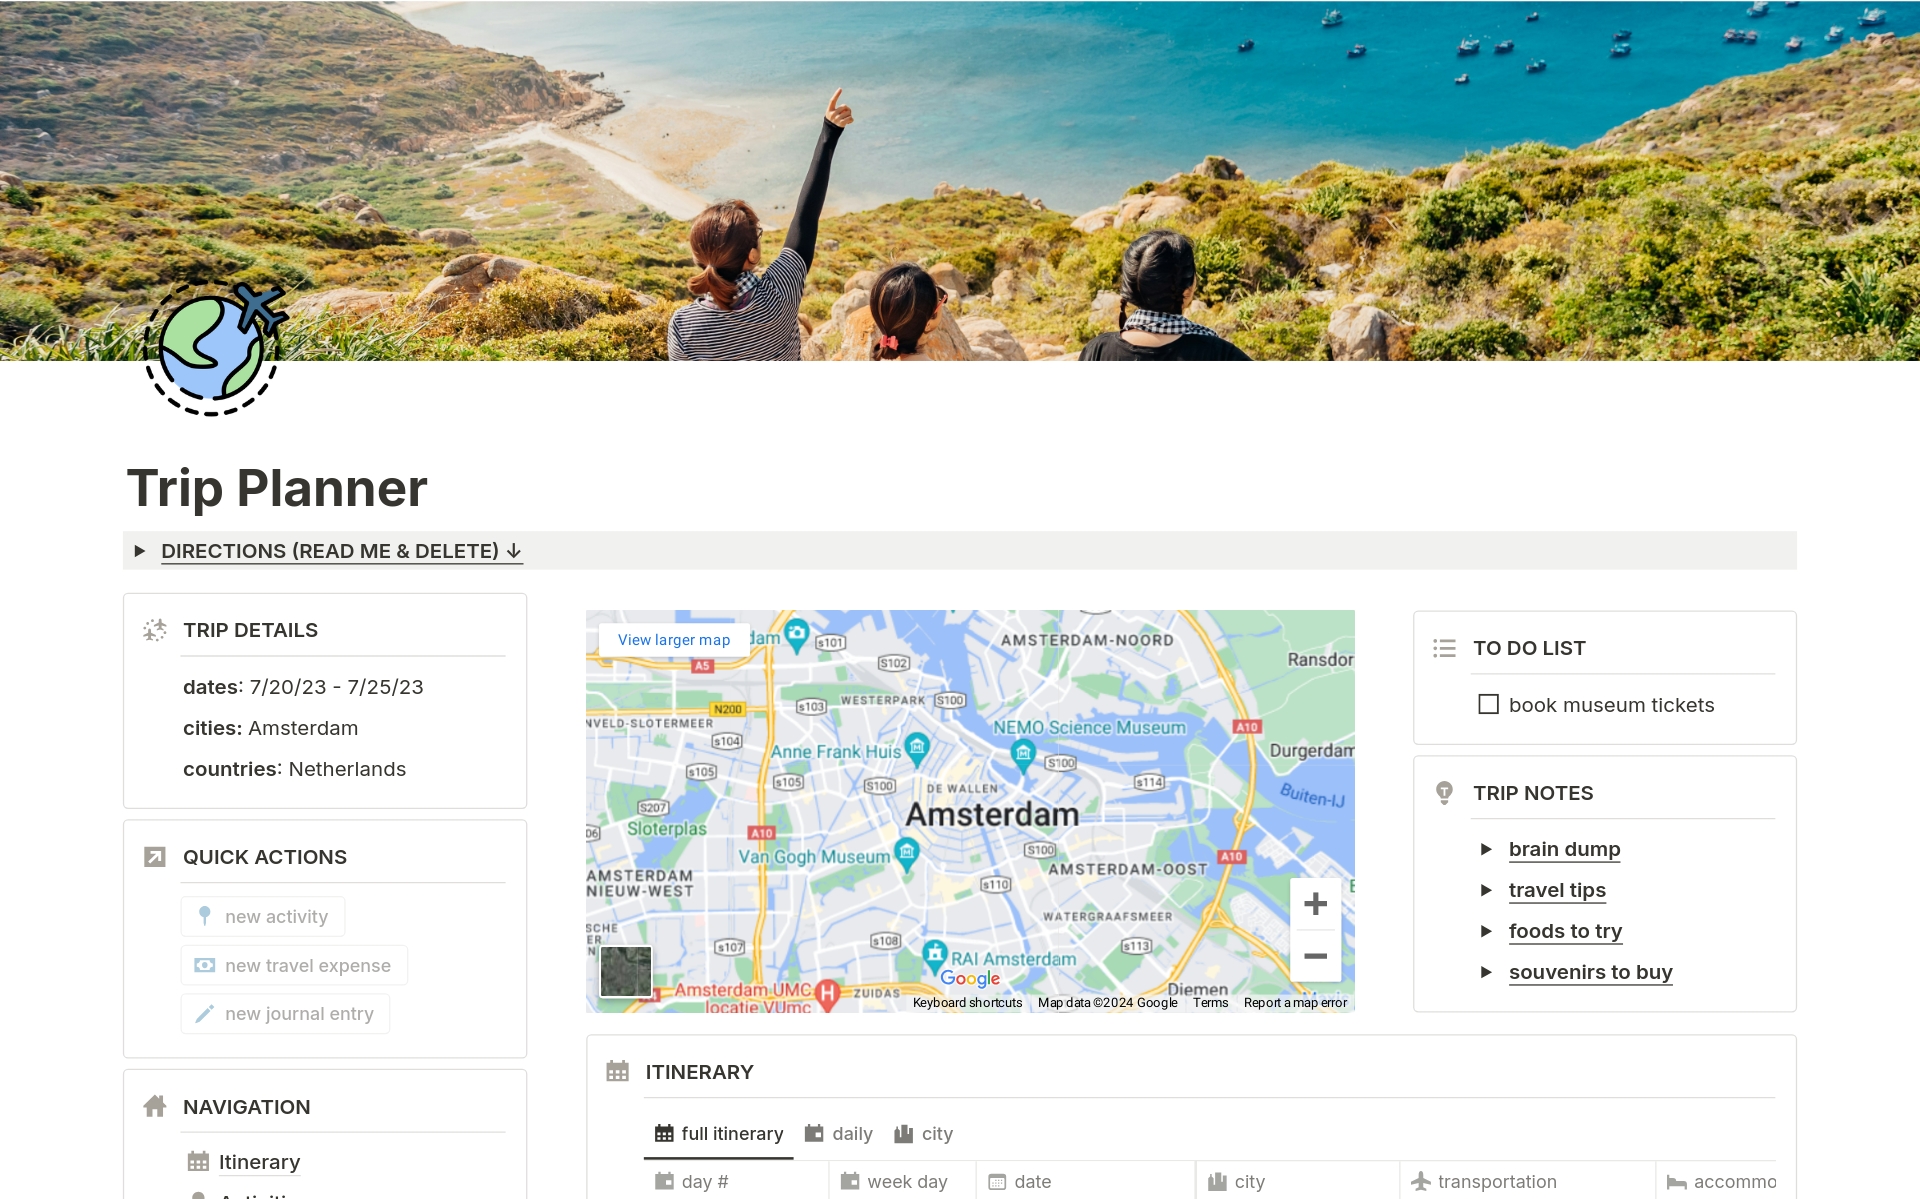 All-in-one travel planner to organize trips and plan your best vacation in one place. 